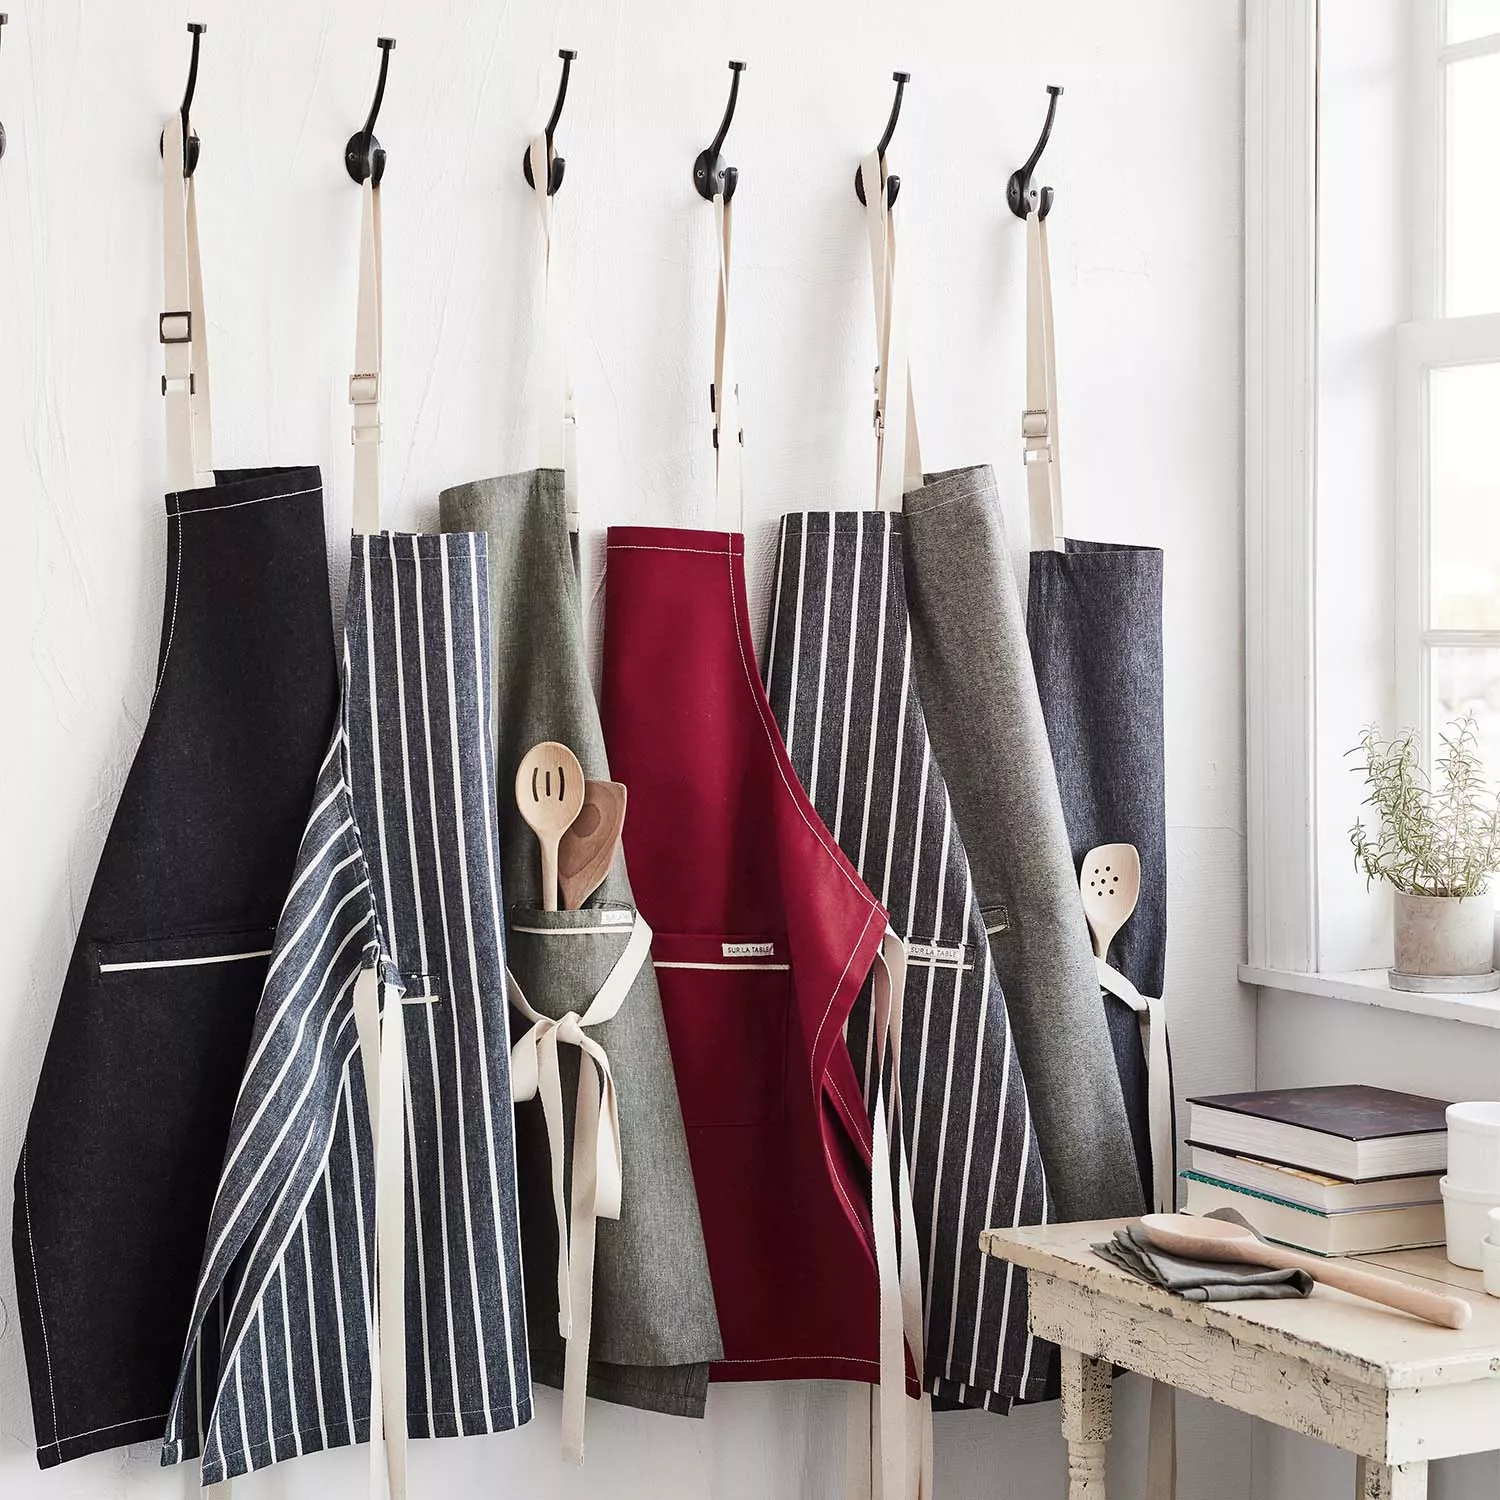 15 Cute Kitchen Aprons for Women 2023 - Cooking Aprons for Chefs